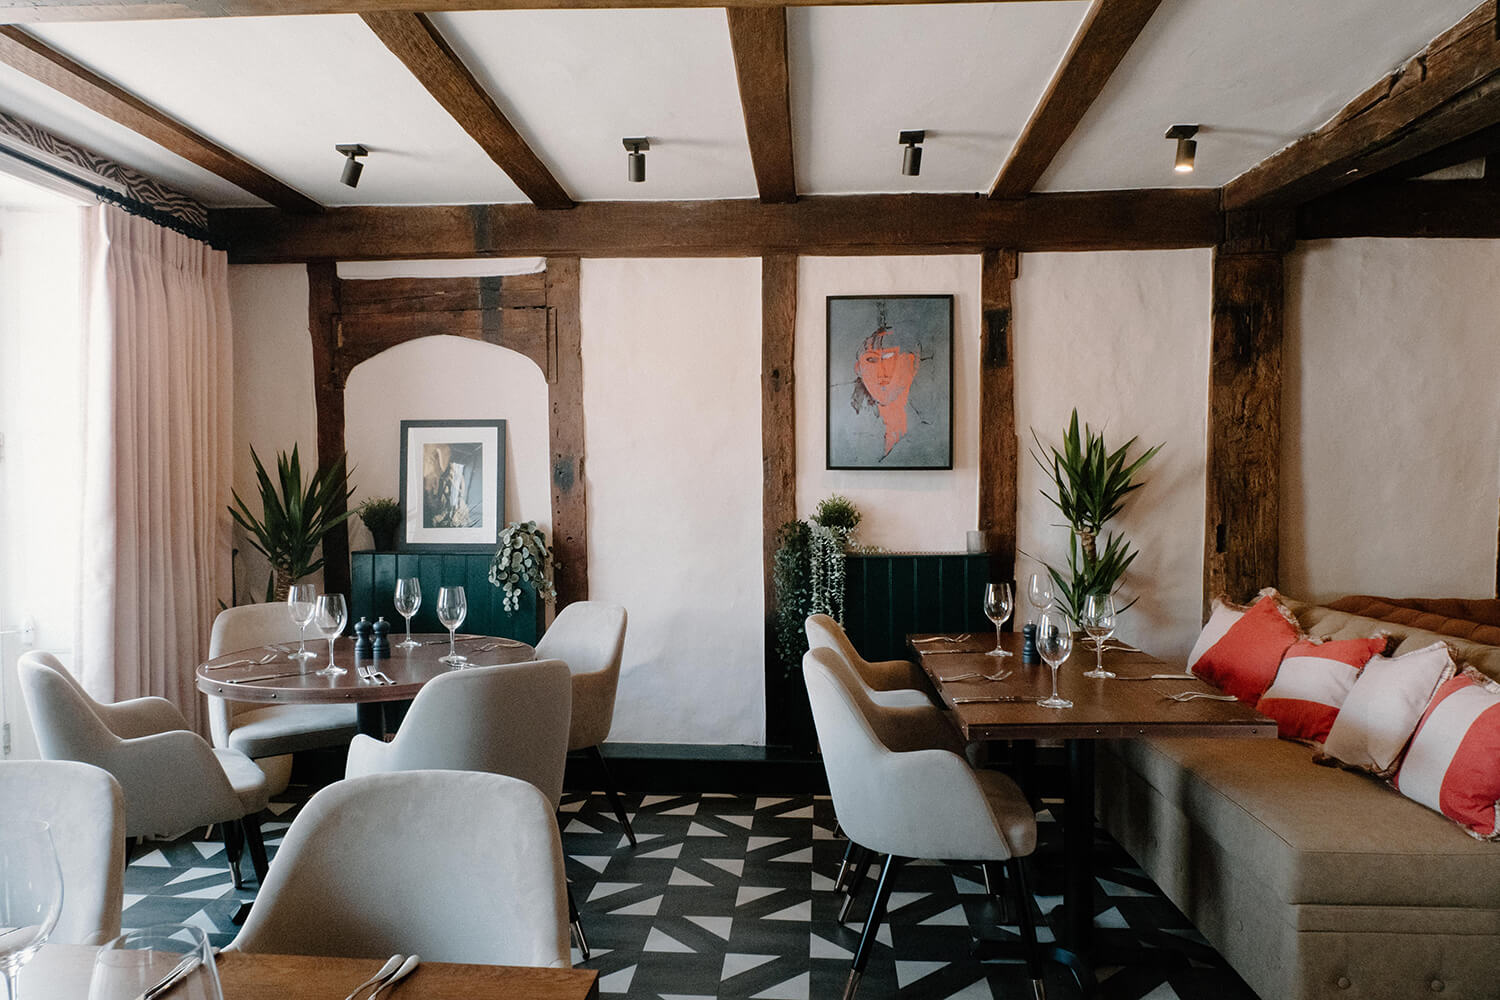 https://tableplacechairs.com/wp-content/uploads/2021/10/THE-GRIFFIN-AMERSHAM-for-web-1.jpg